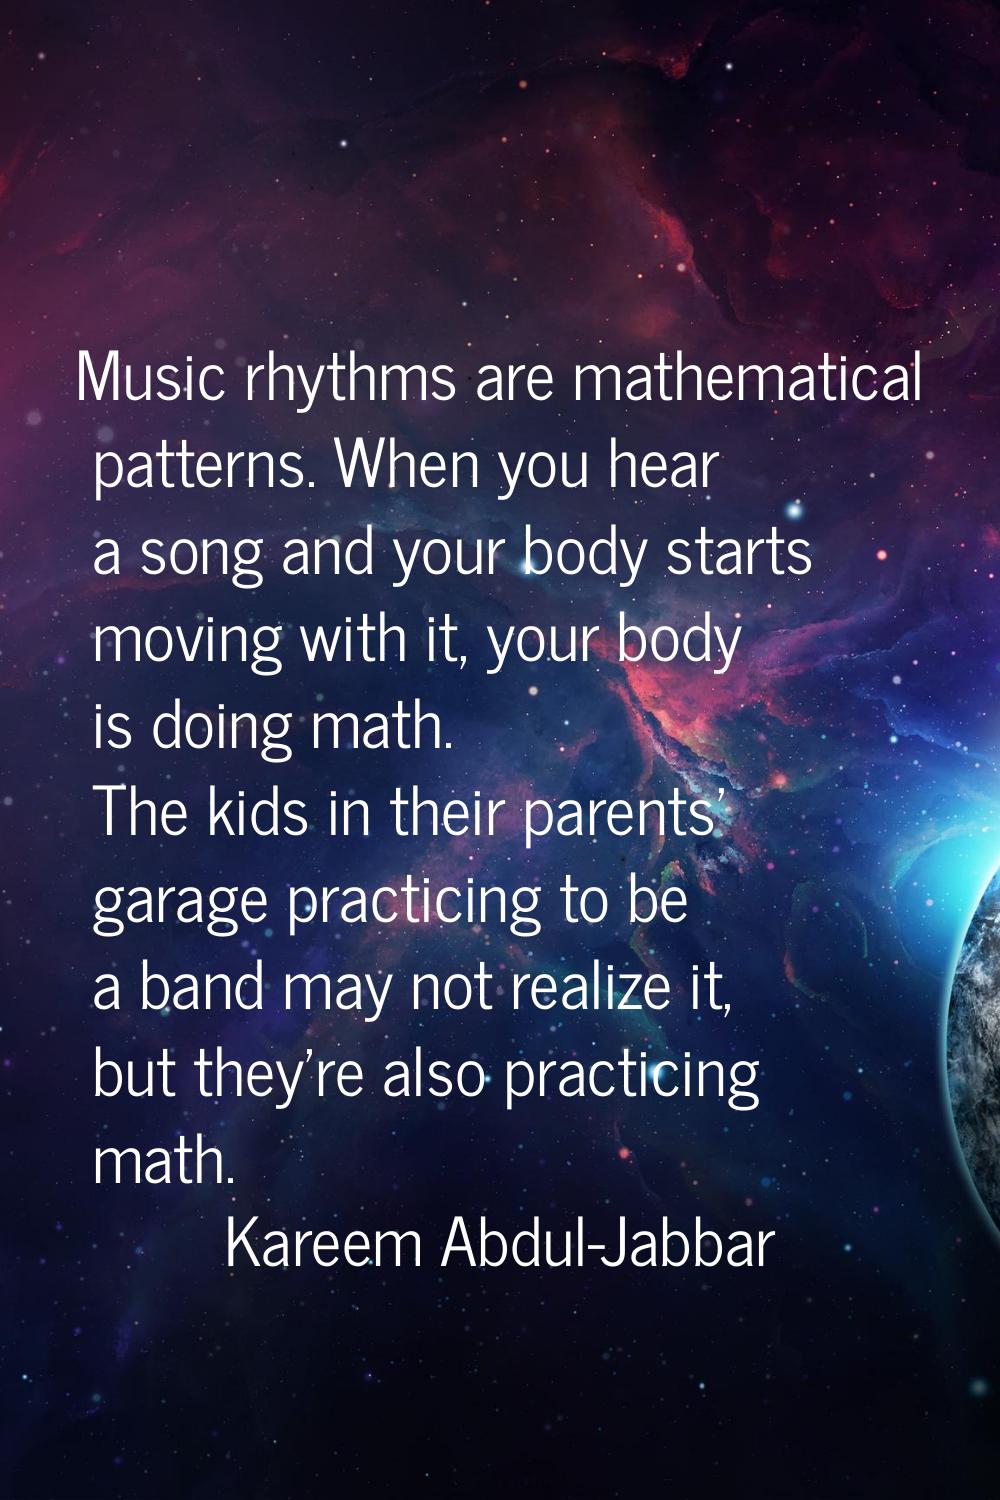 Music rhythms are mathematical patterns. When you hear a song and your body starts moving with it, 